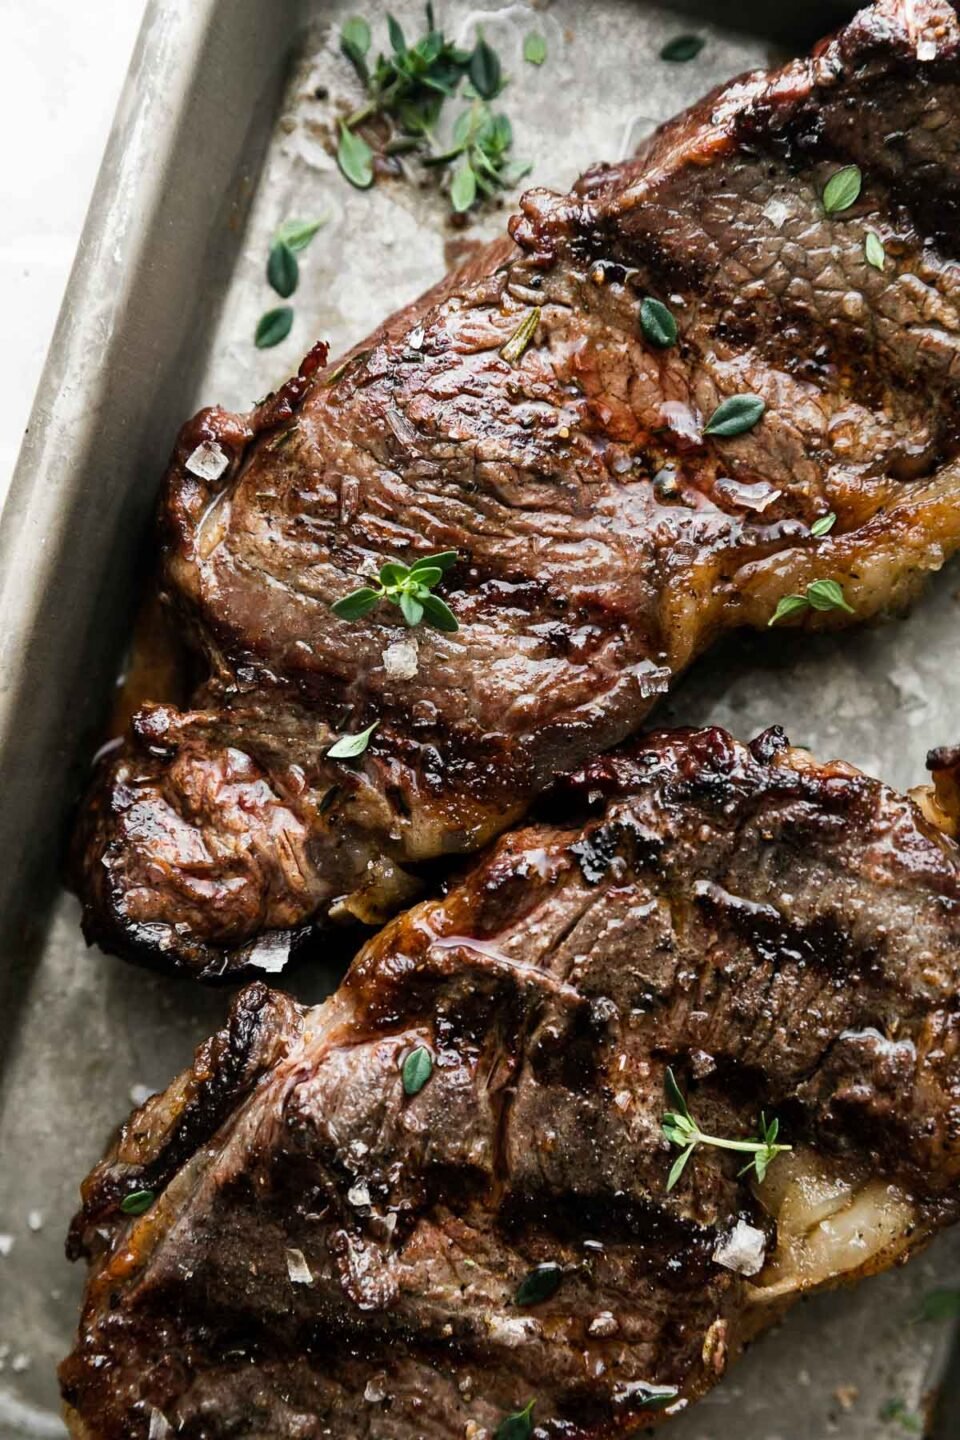 https://playswellwithbutter.com/wp-content/uploads/2022/05/Perfect-Grilled-Steak-Butter-Basted-with-Herb-Brush-21-960x1440.jpg